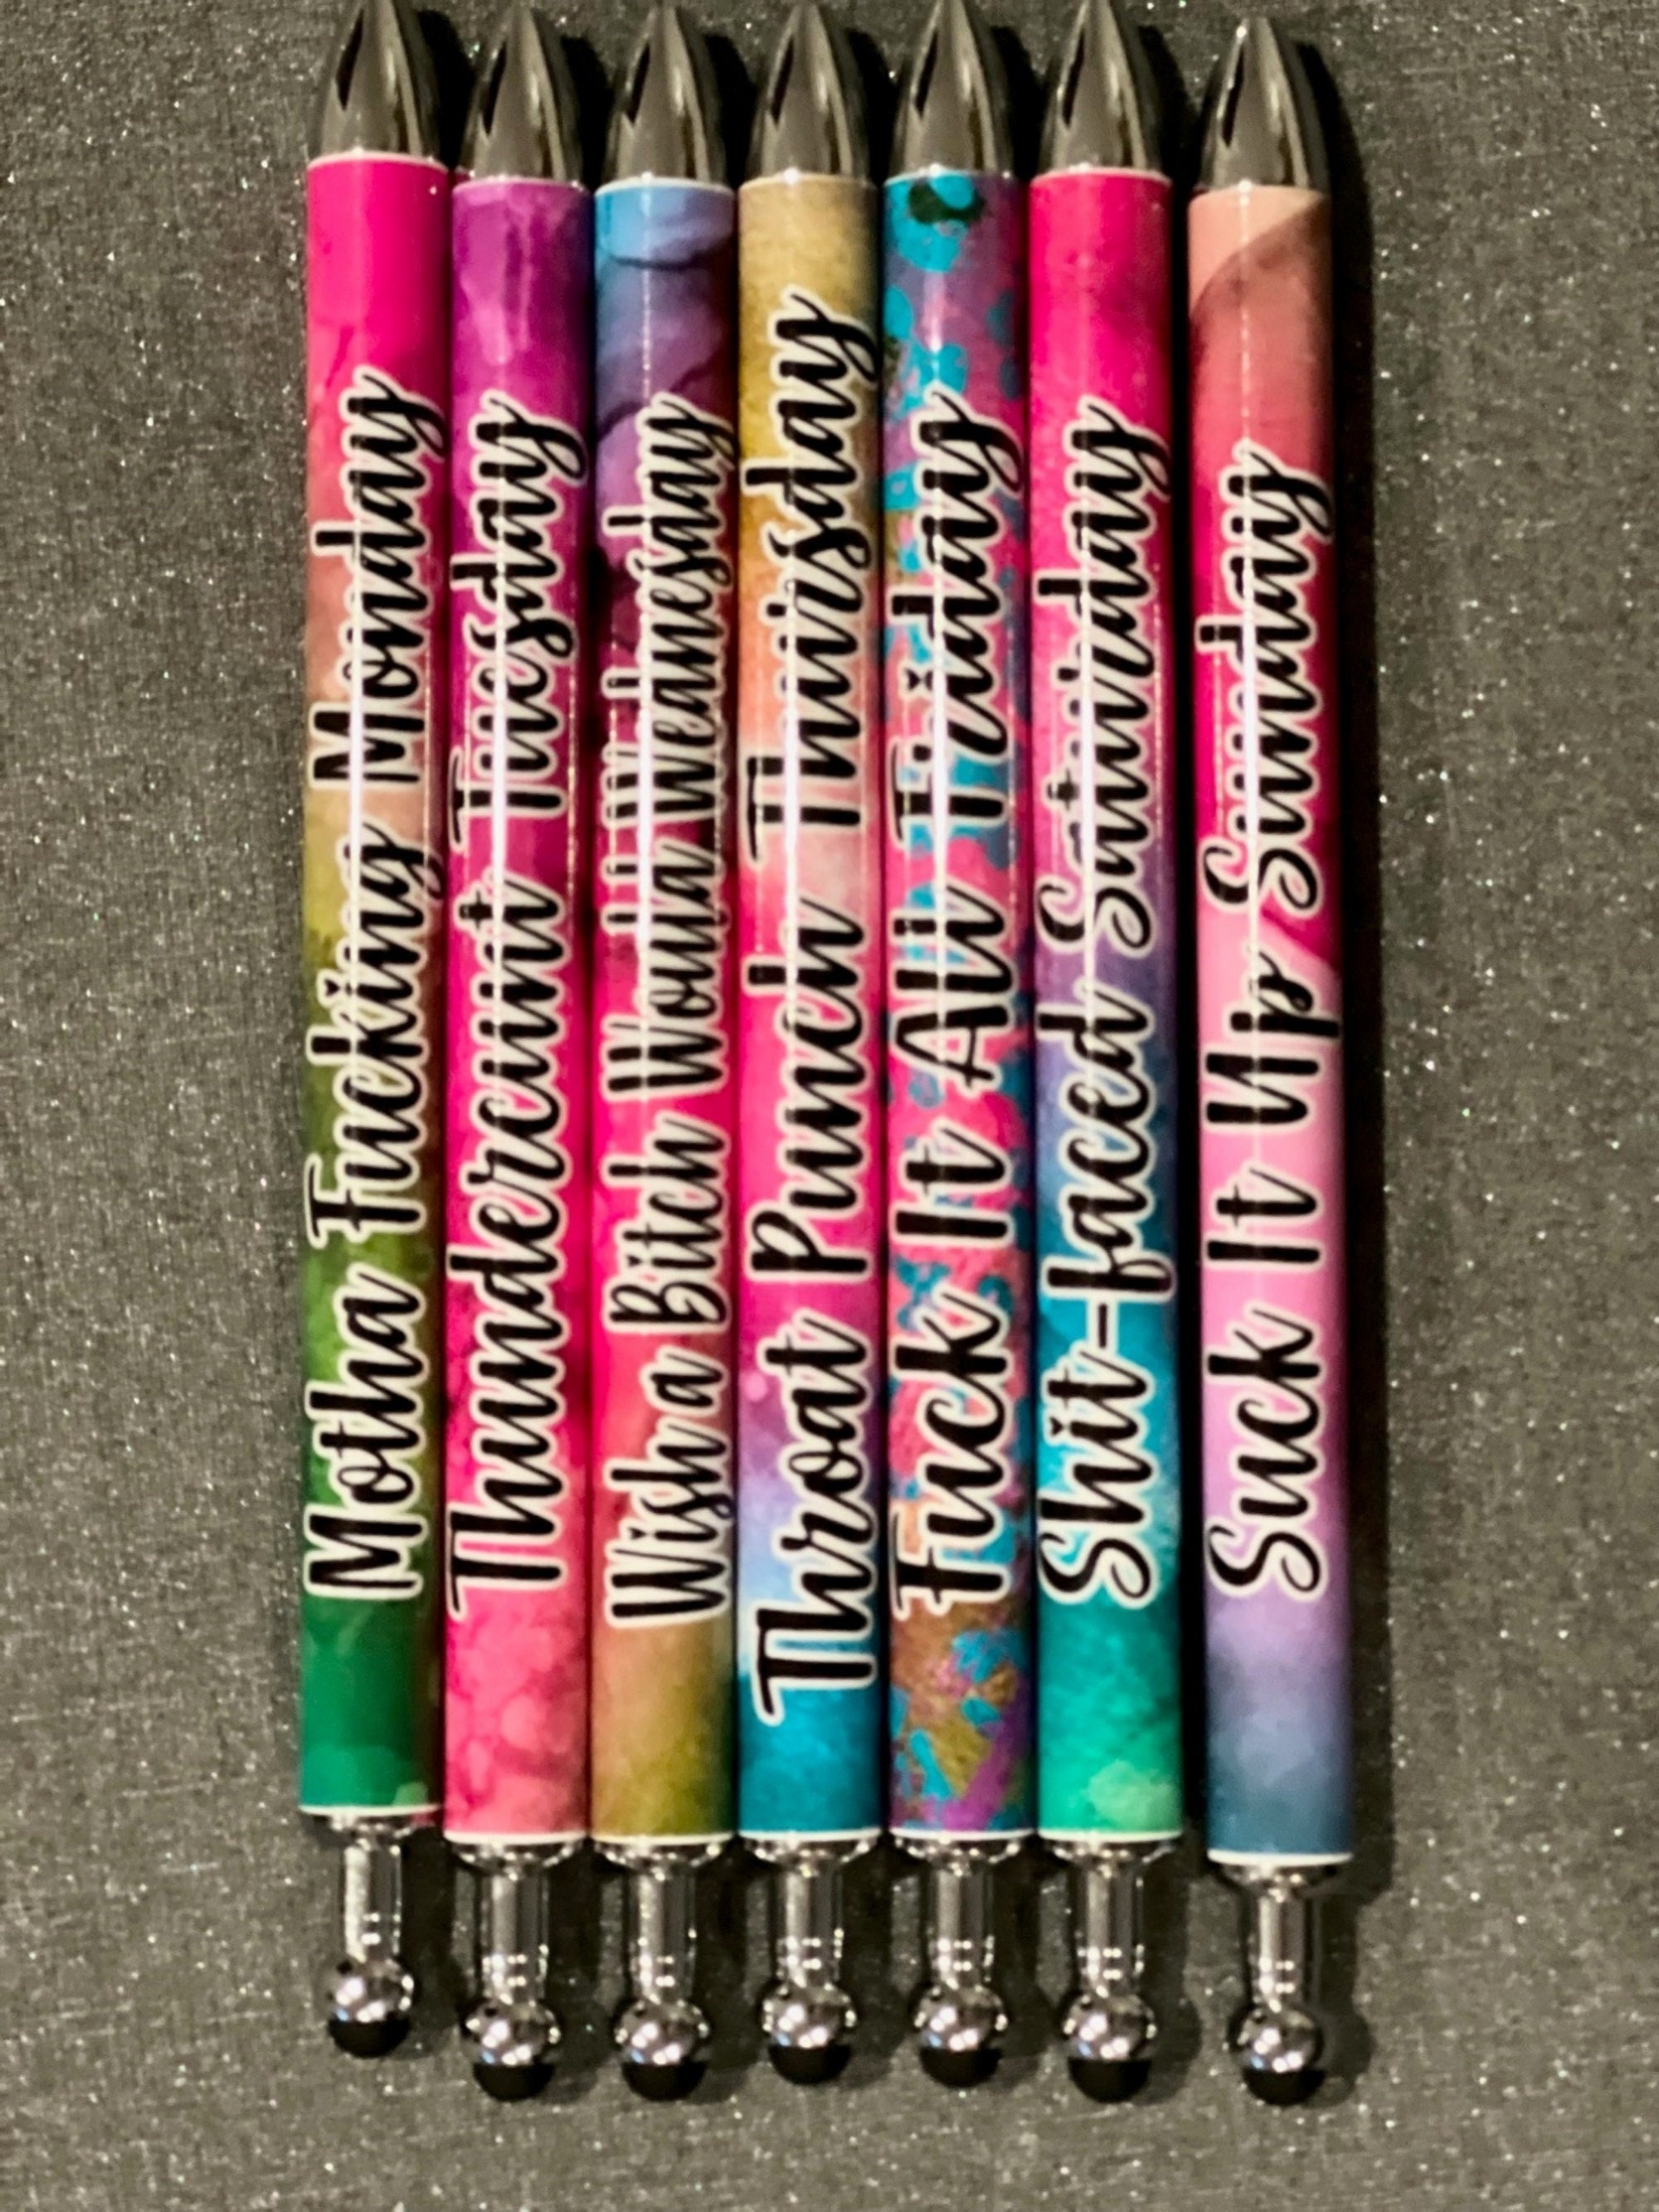 Rated R Pen Set Weekday Pens 7 Pens 